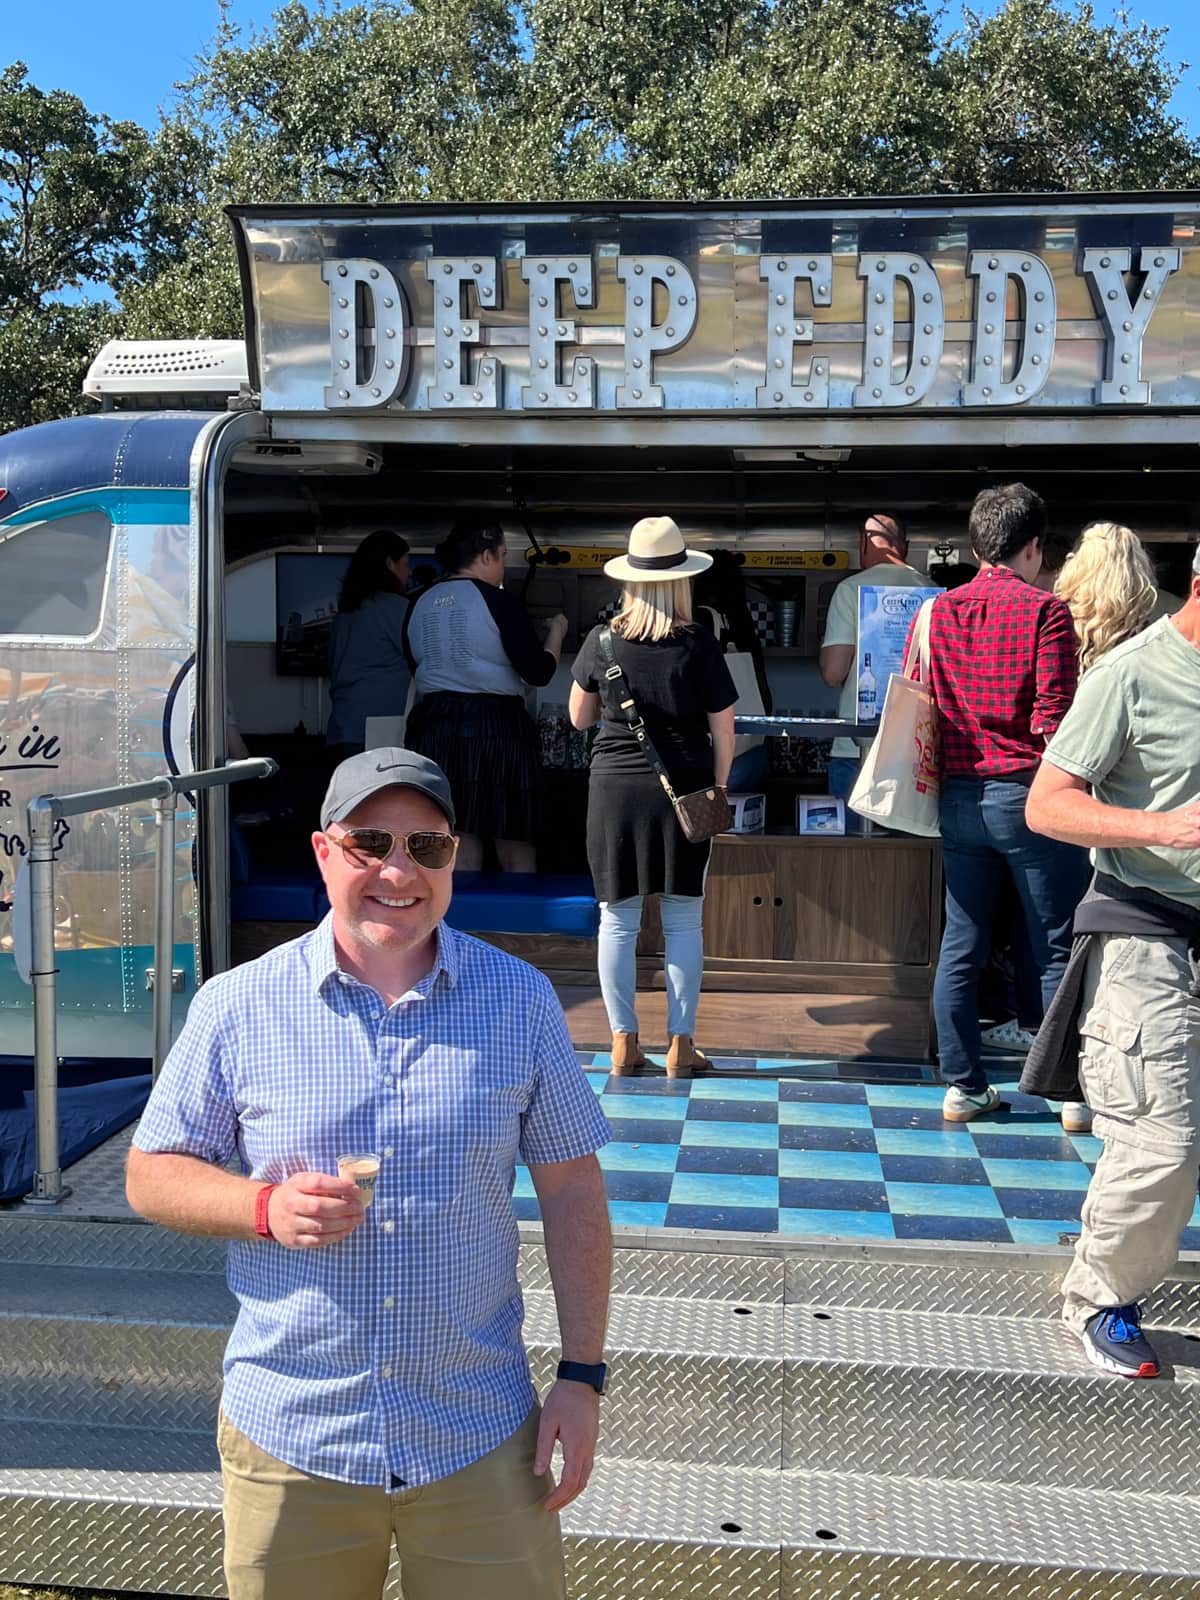 Enjoying a frozen hot chocolate with Deep Eddy vodka at the Austin Food + Wine Festival